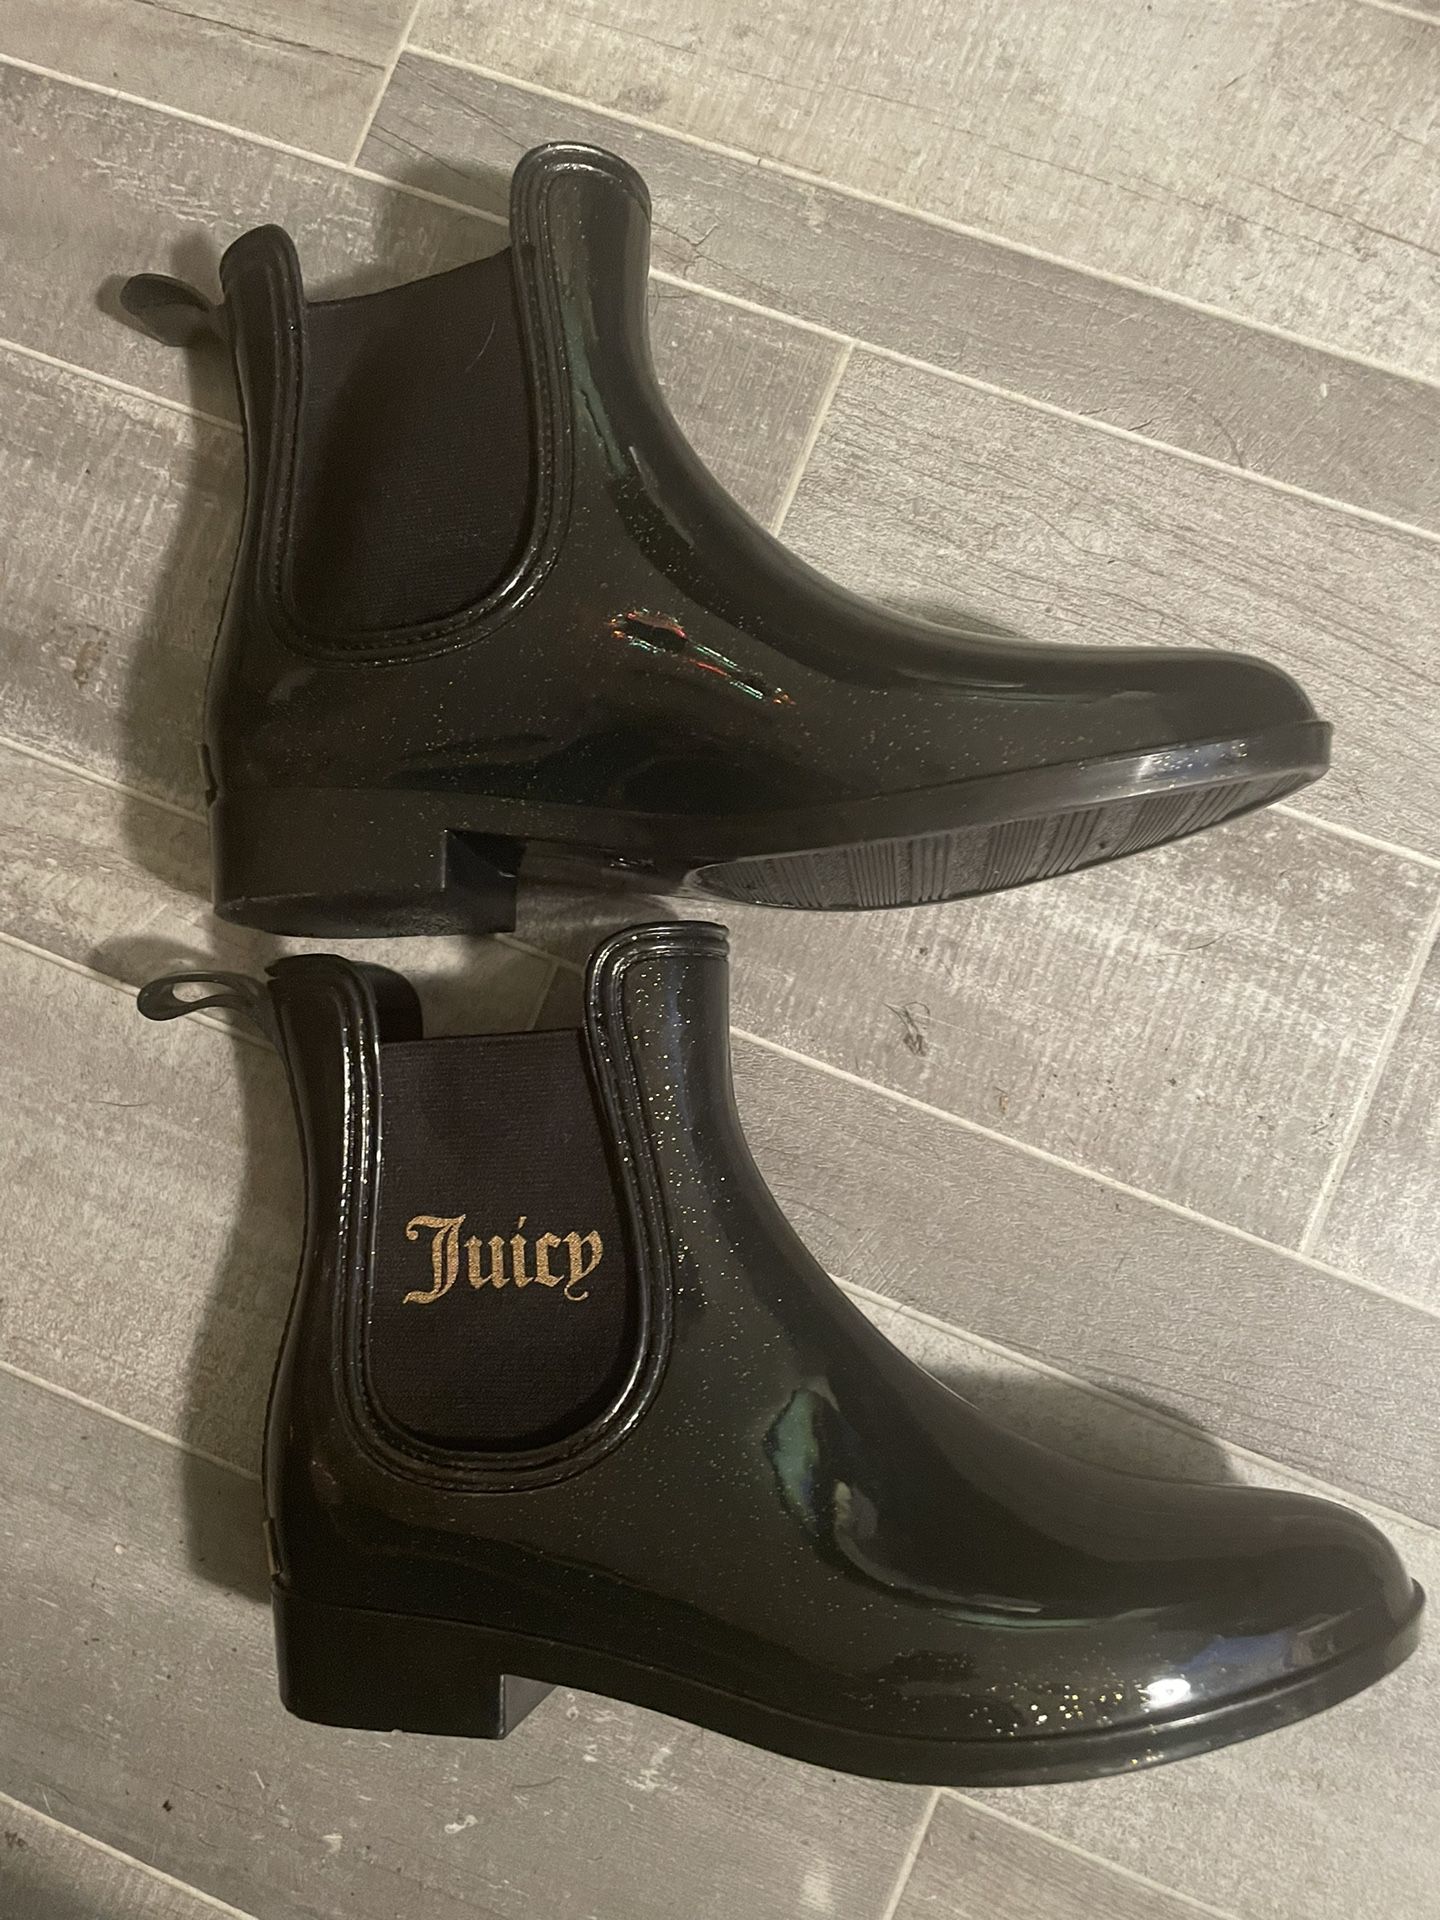 Juicy Couture Shoes Women's 7 Rori Black Sparkle Ankle Rain Boots Pull On Rubber